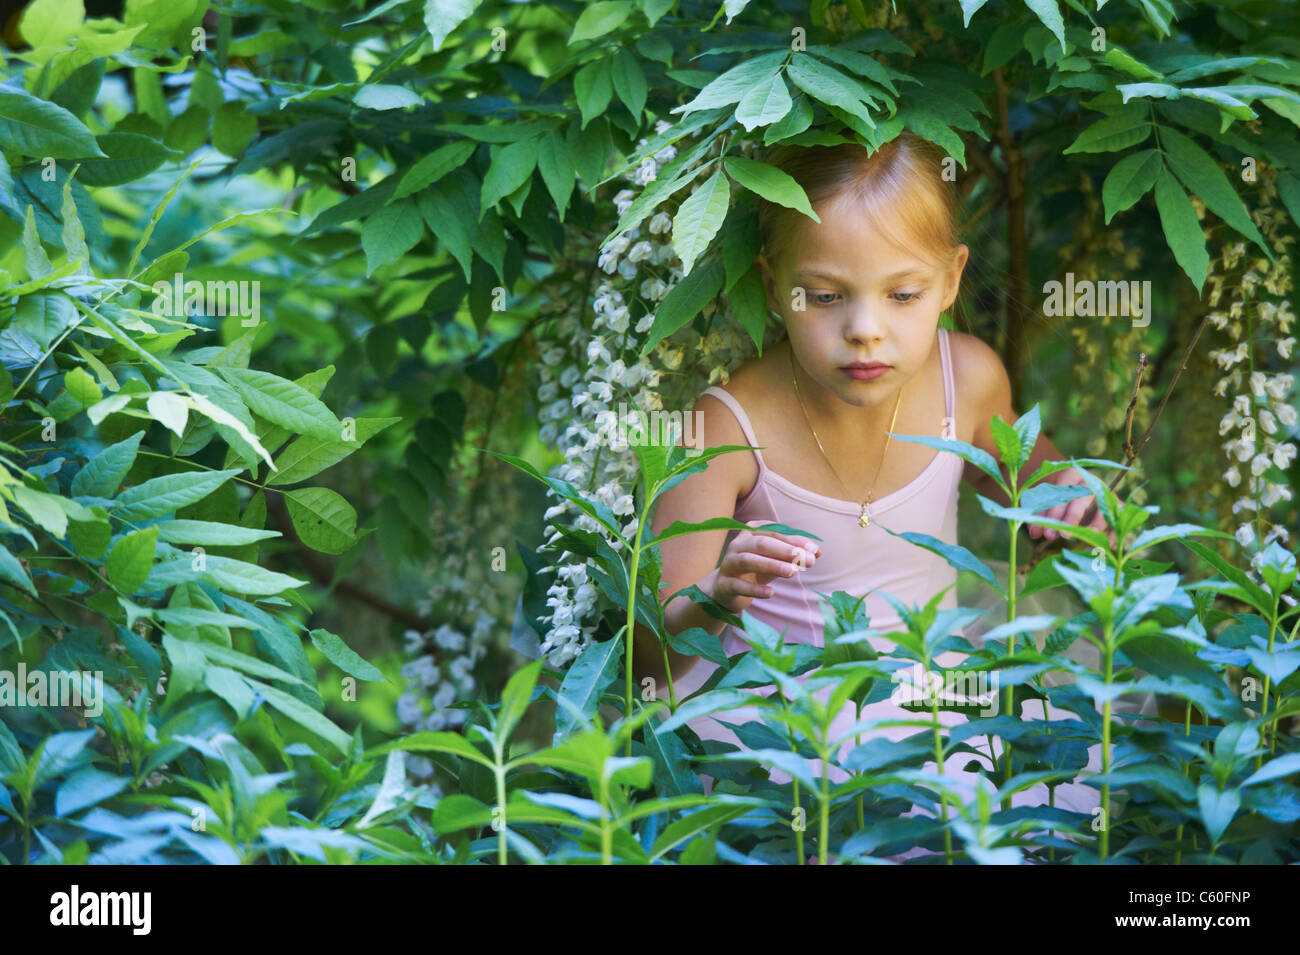 Girl in ballet costume playing in bush Stock Photo